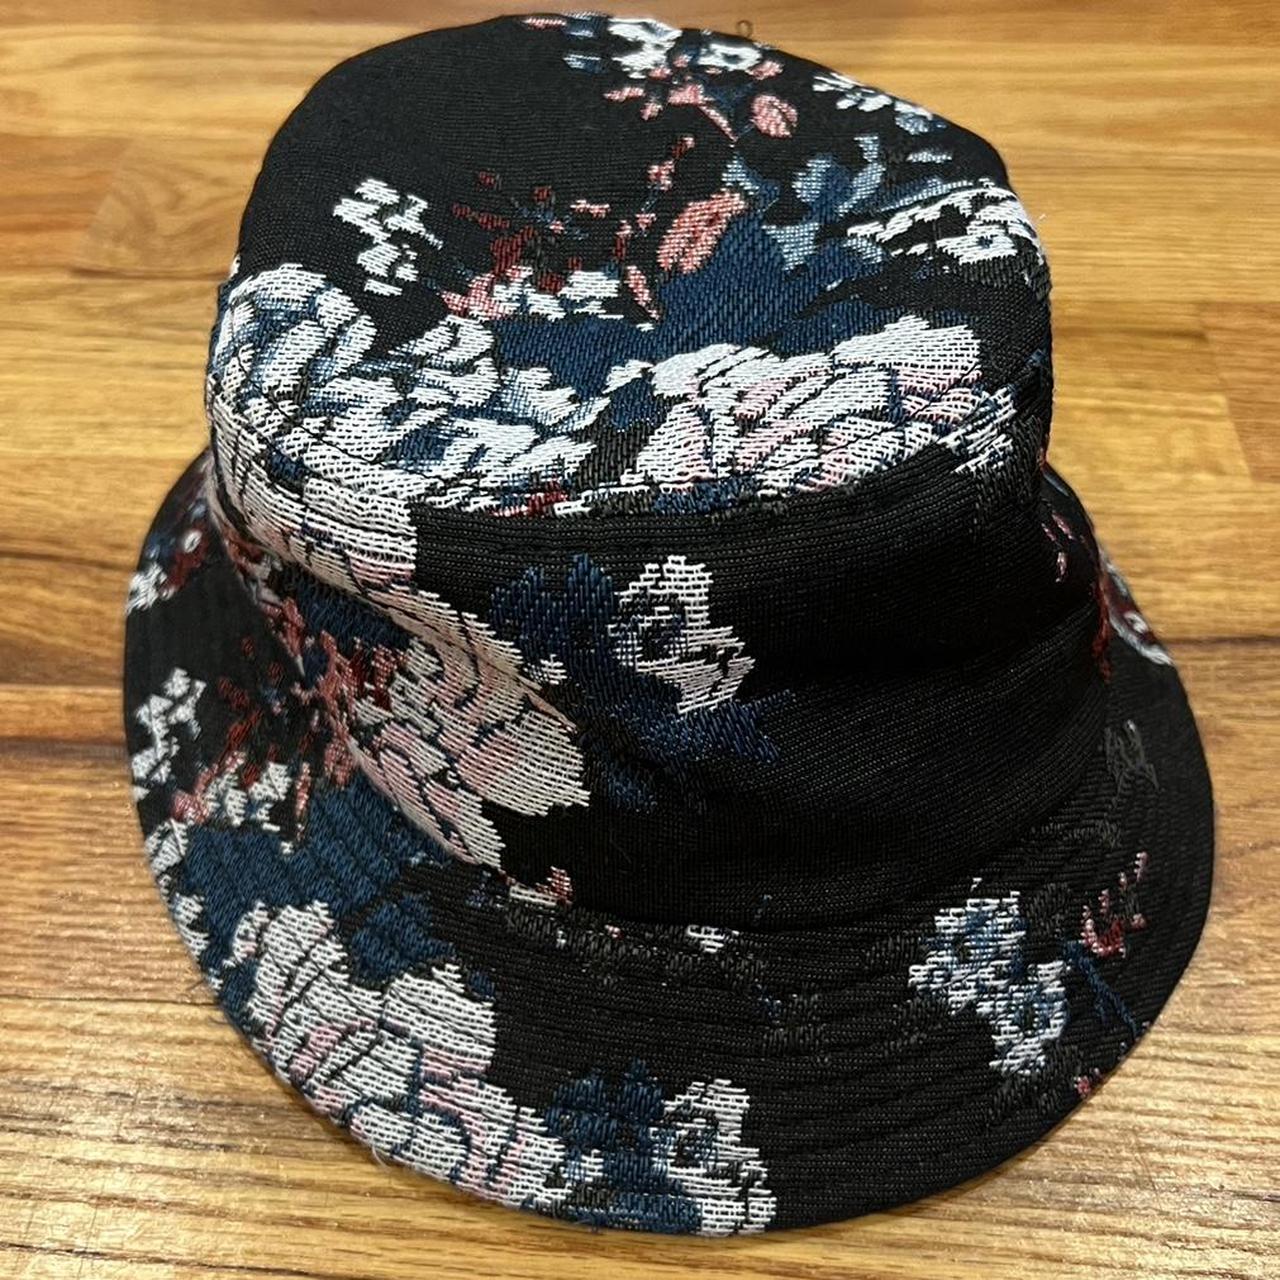 Kith Floral Bucket Hat 花柄 - ハット